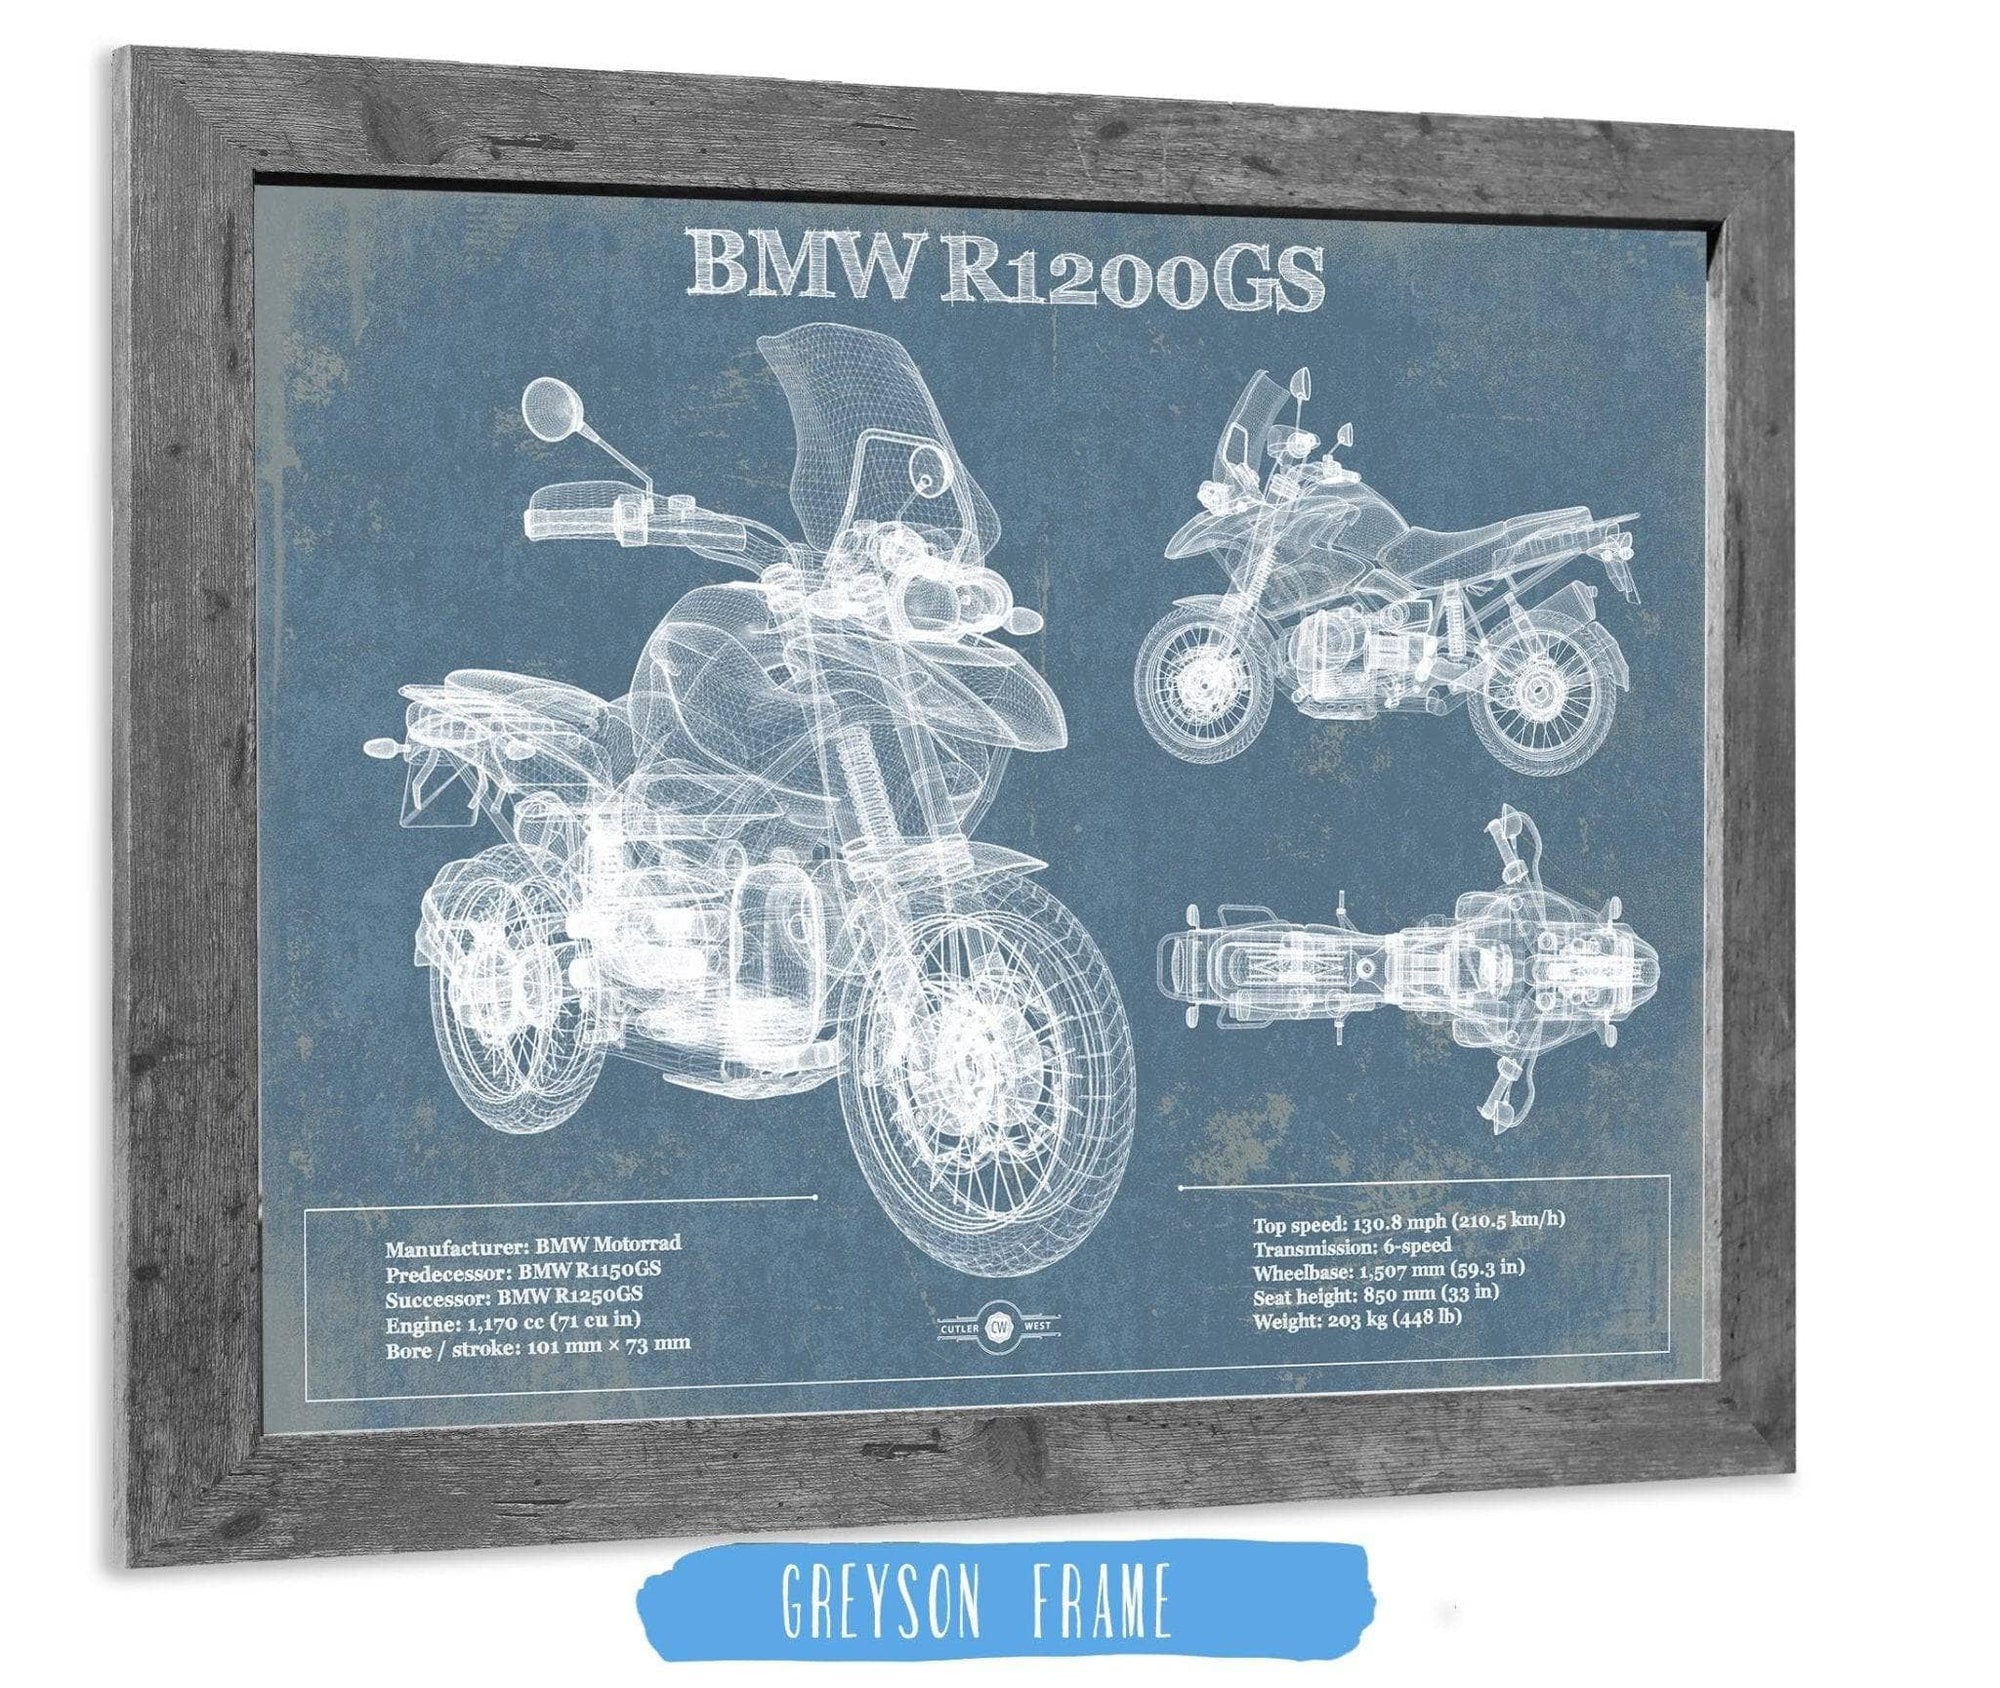 Cutler West Vehicle Collection 14" x 11" / Greyson Frame BMW R1200GS Blueprint Motorcycle Patent Print 833110086_47424